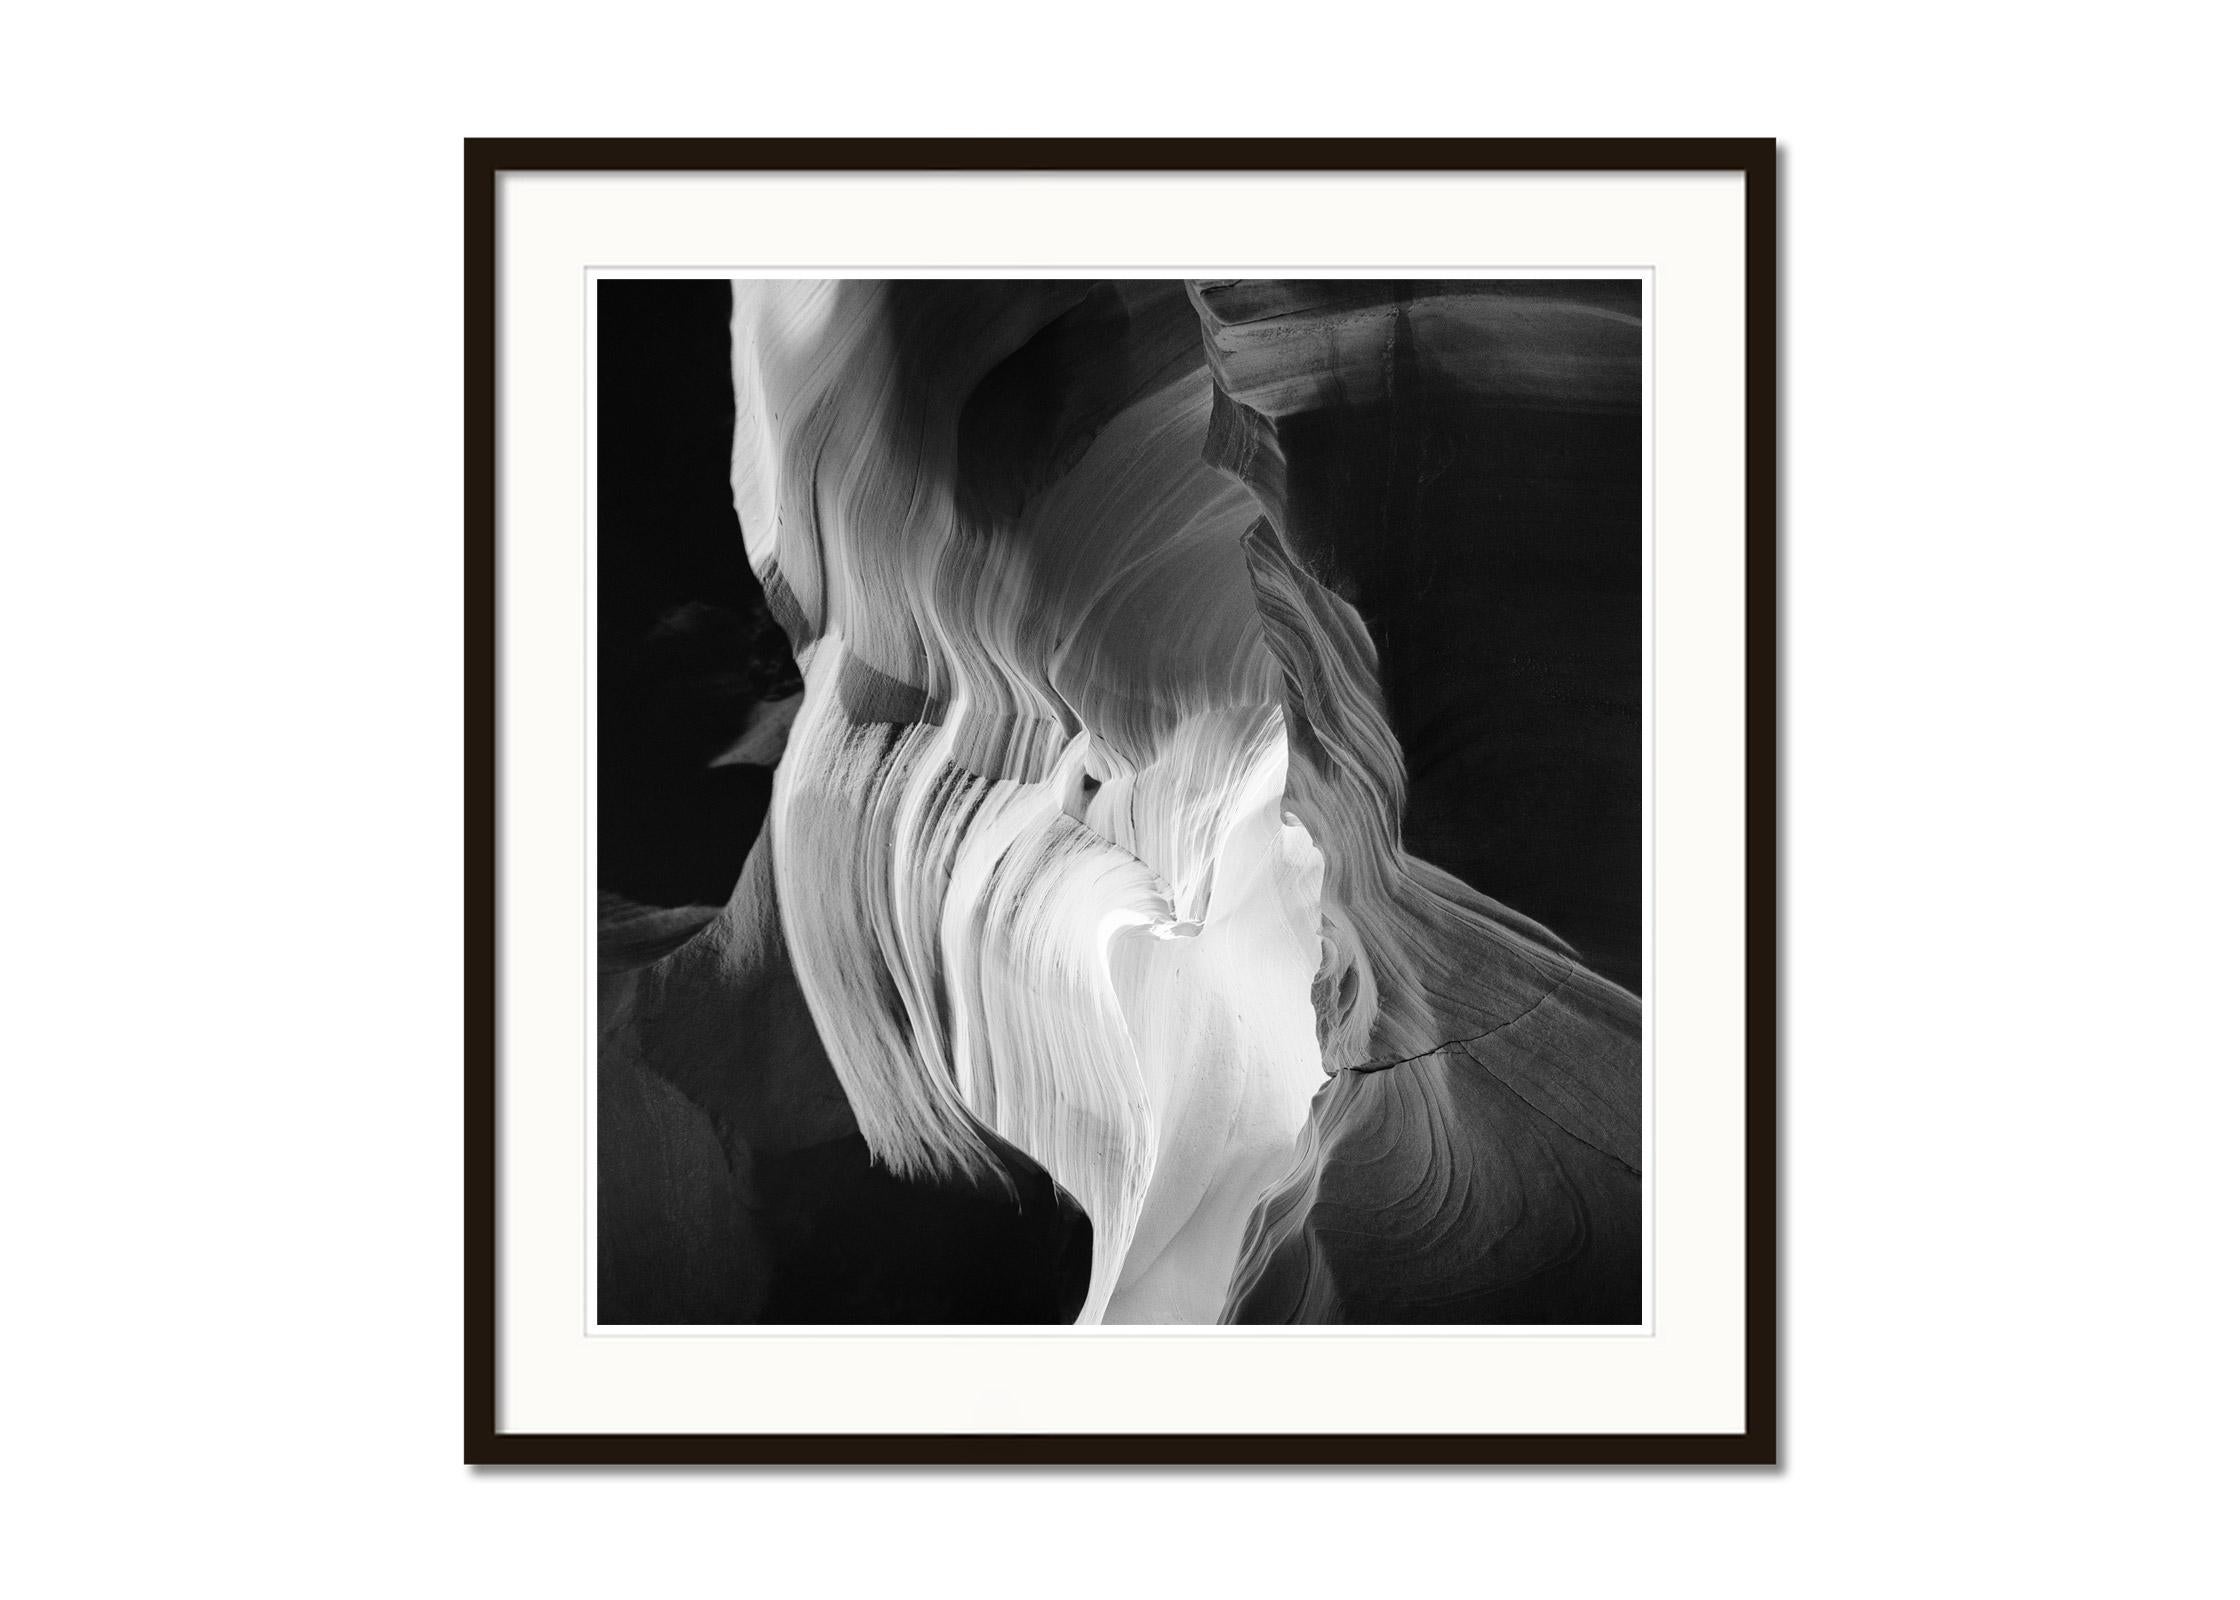 Heart, Antelope Canyon, Arizona, USA, black & white photography, large landscape - Contemporary Photograph by Gerald Berghammer, Ina Forstinger